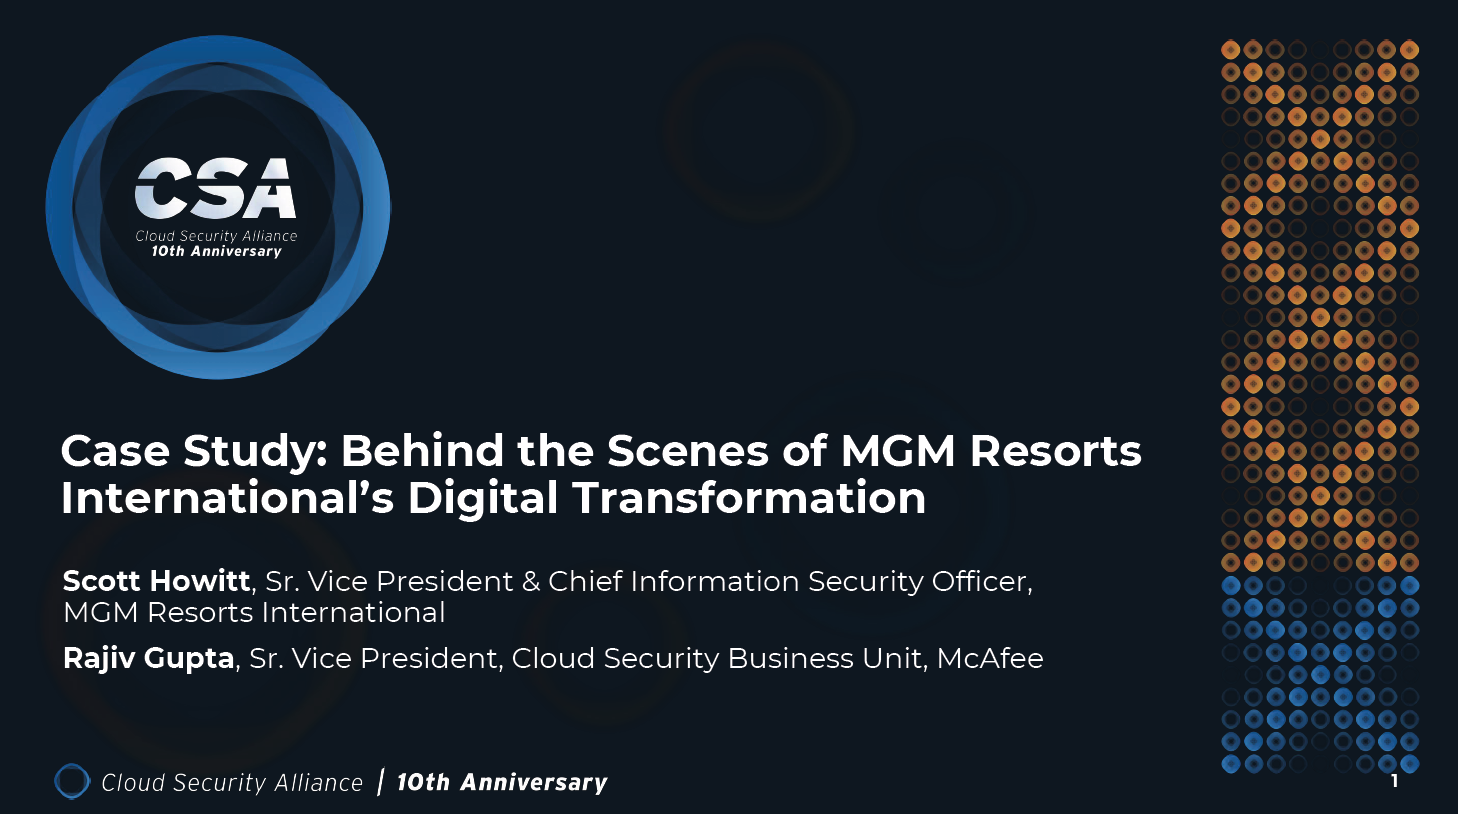 Case Study: Behind the Scenes of MGM Resorts’ Digital Transformation